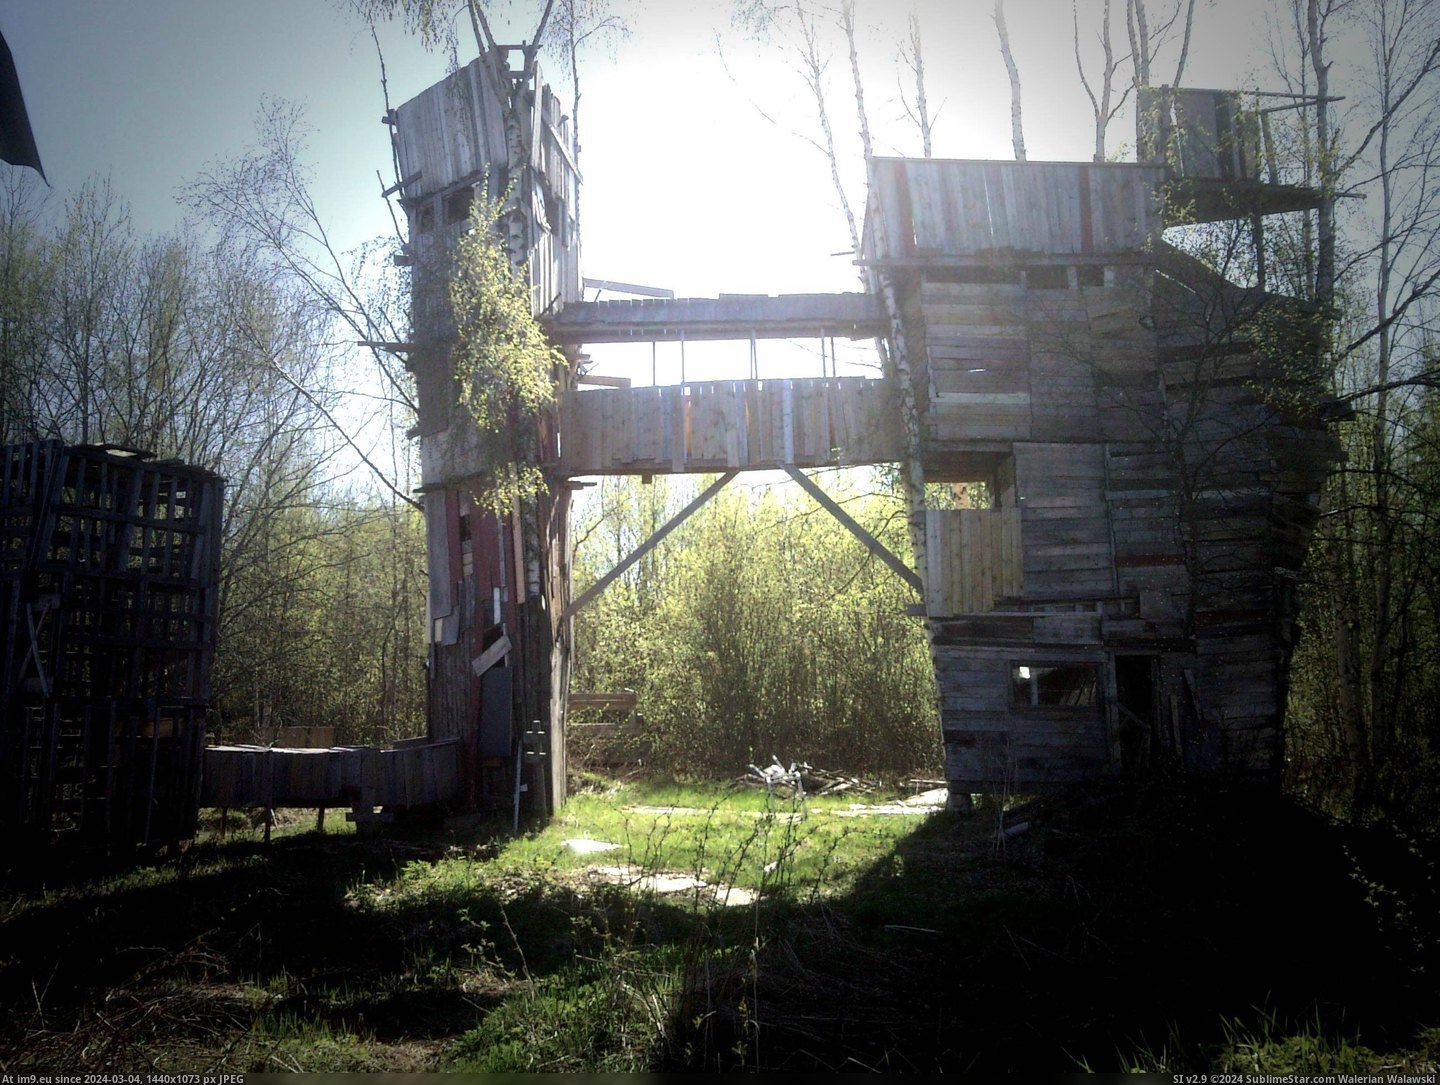 #Work #Hard #Built #Neighbours #Treehouse #Complai #Brothers #Summers #Torn [Pics] Me and my brothers treehouse we built during 5 summers of hard work, it had to be torn down because of neighbours complai Pic. (Obraz z album My r/PICS favs))